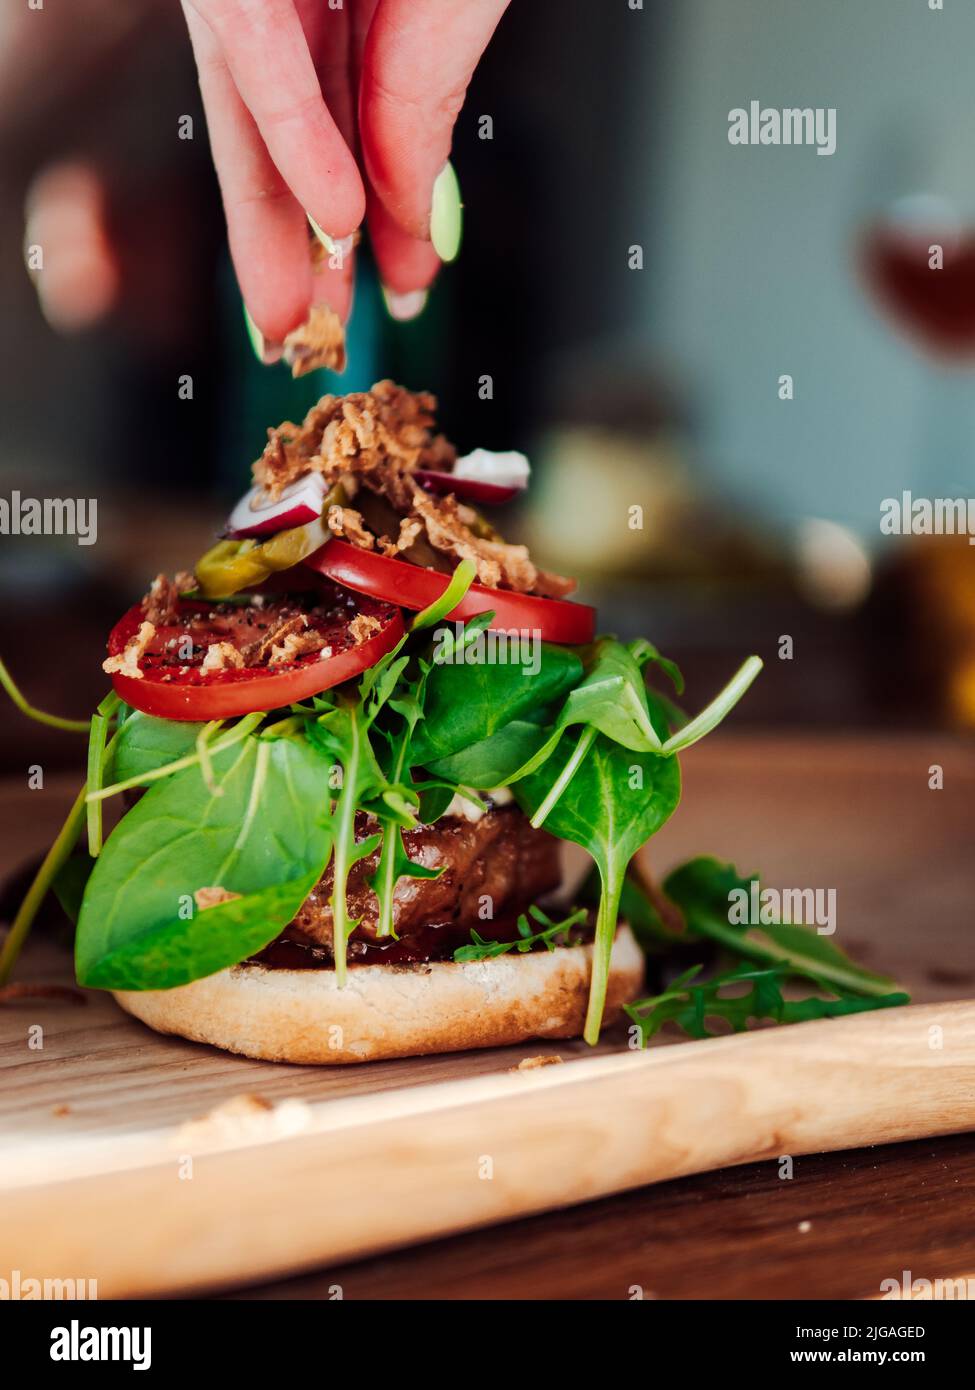 A female hand dressing a yummy burger with meat, salad and other ingredients on a wooden surface Stock Photo